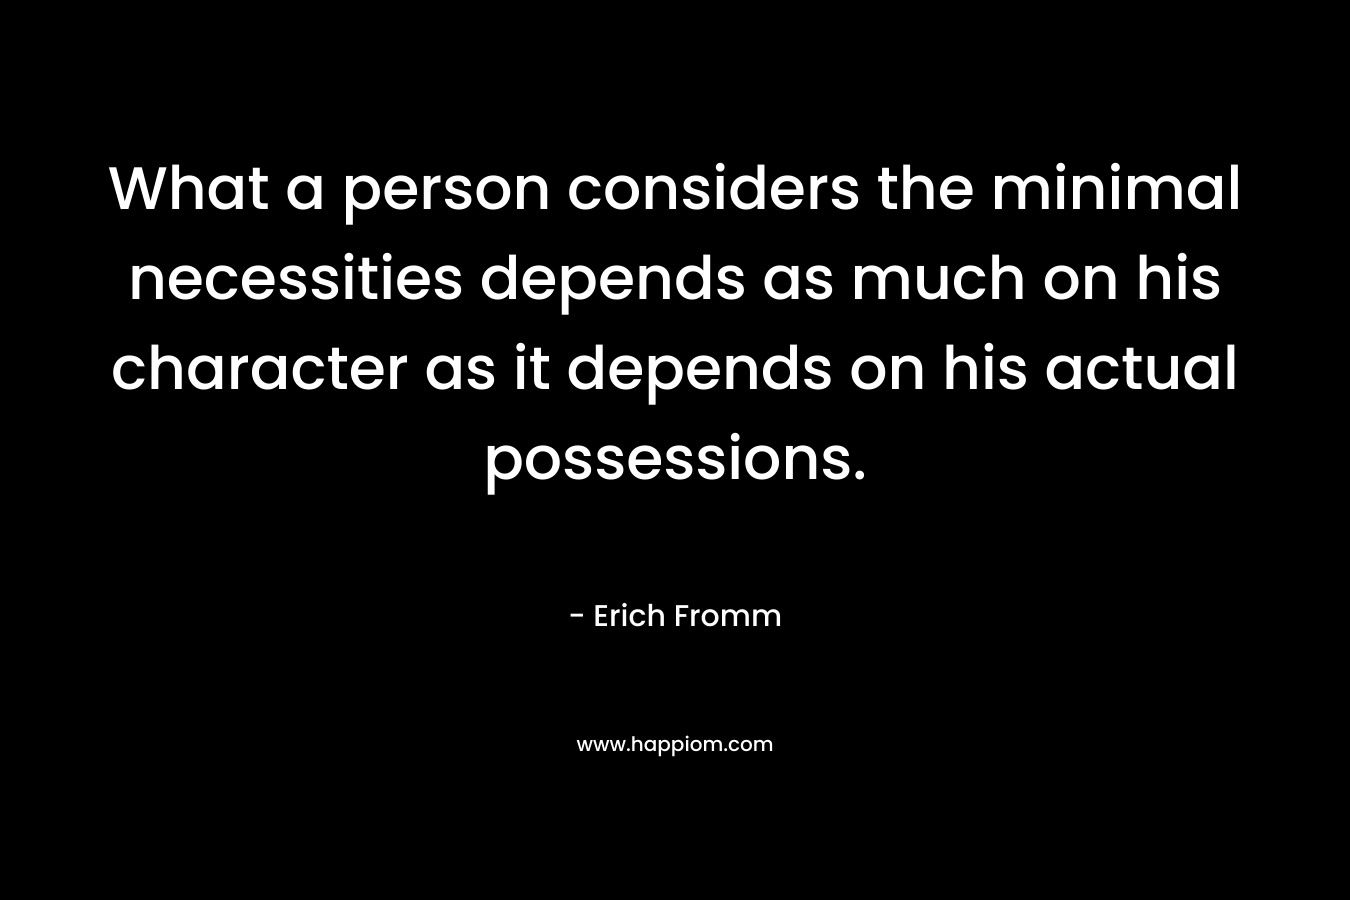 What a person considers the minimal necessities depends as much on his character as it depends on his actual possessions.